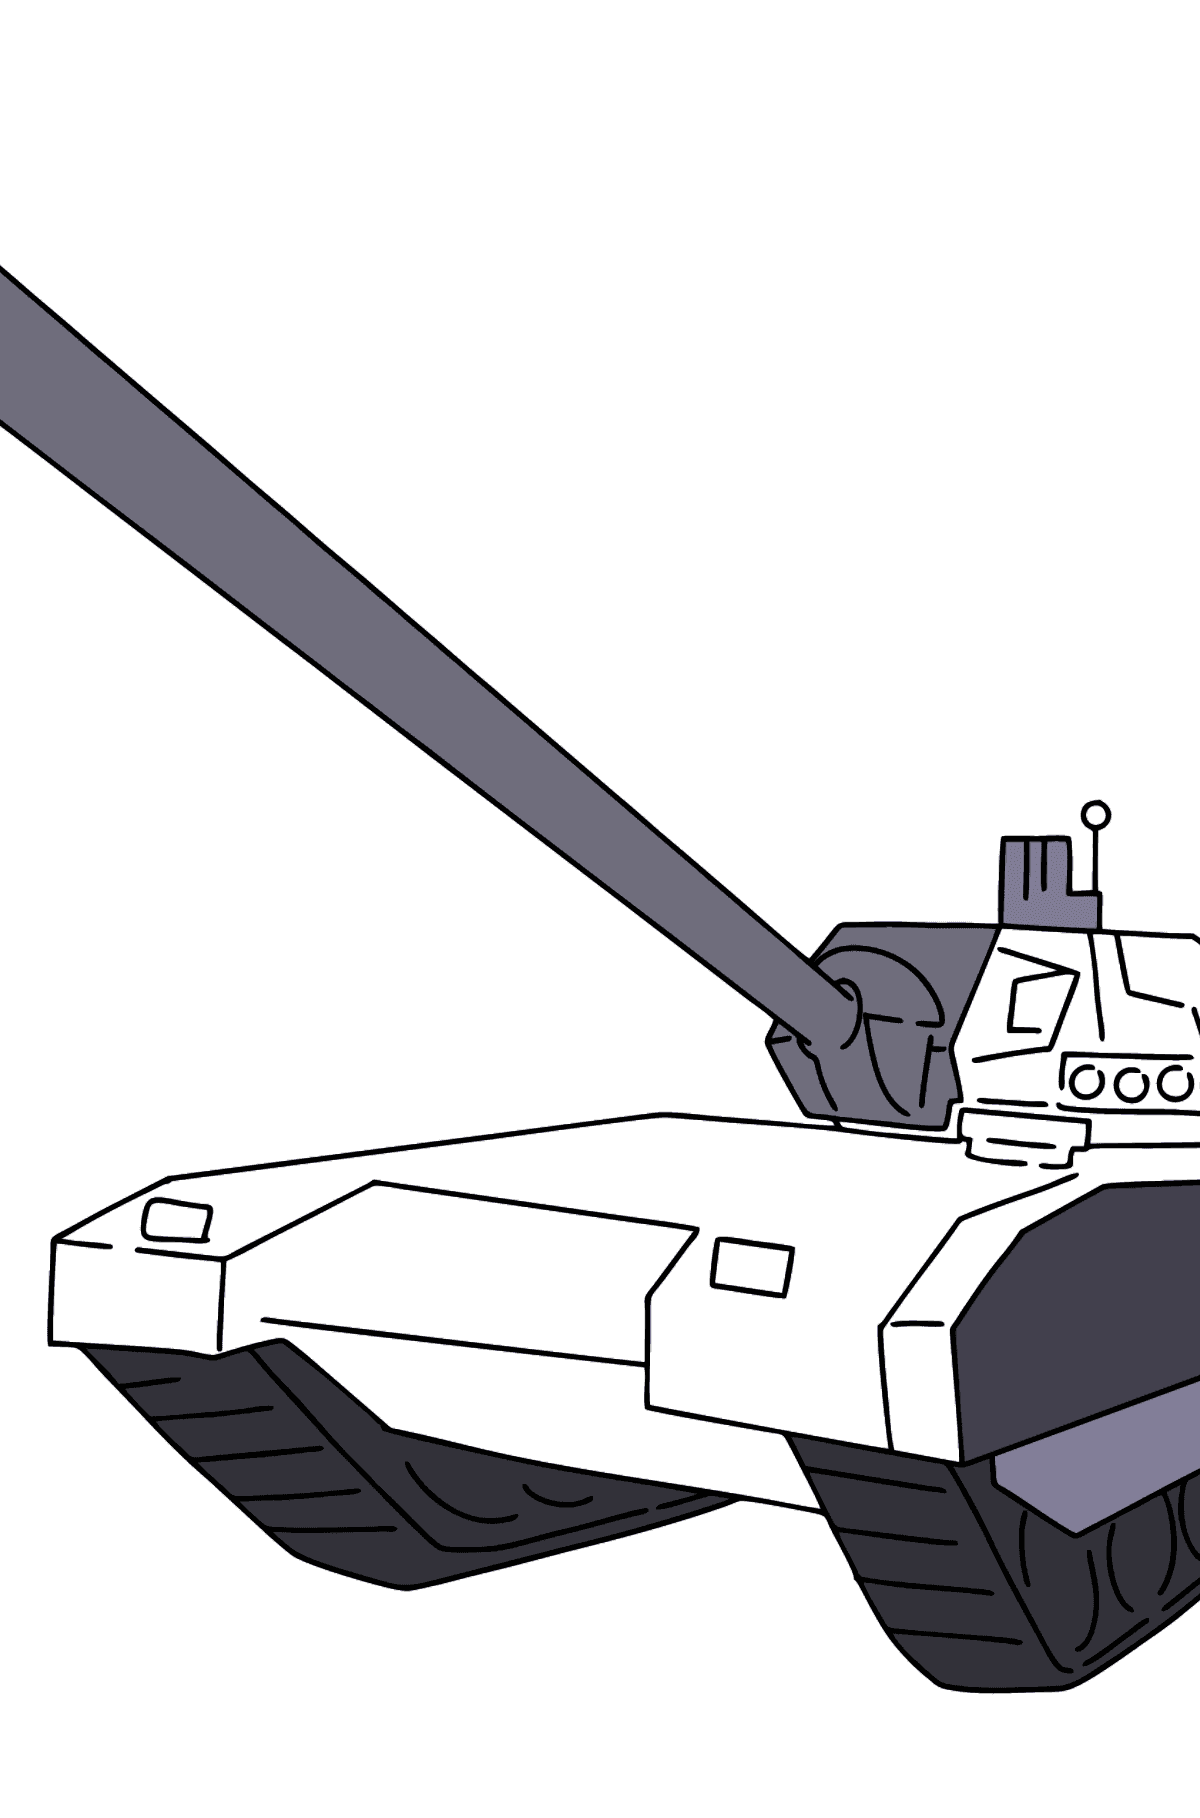 Armata Tank coloring page - Coloring Pages for Kids